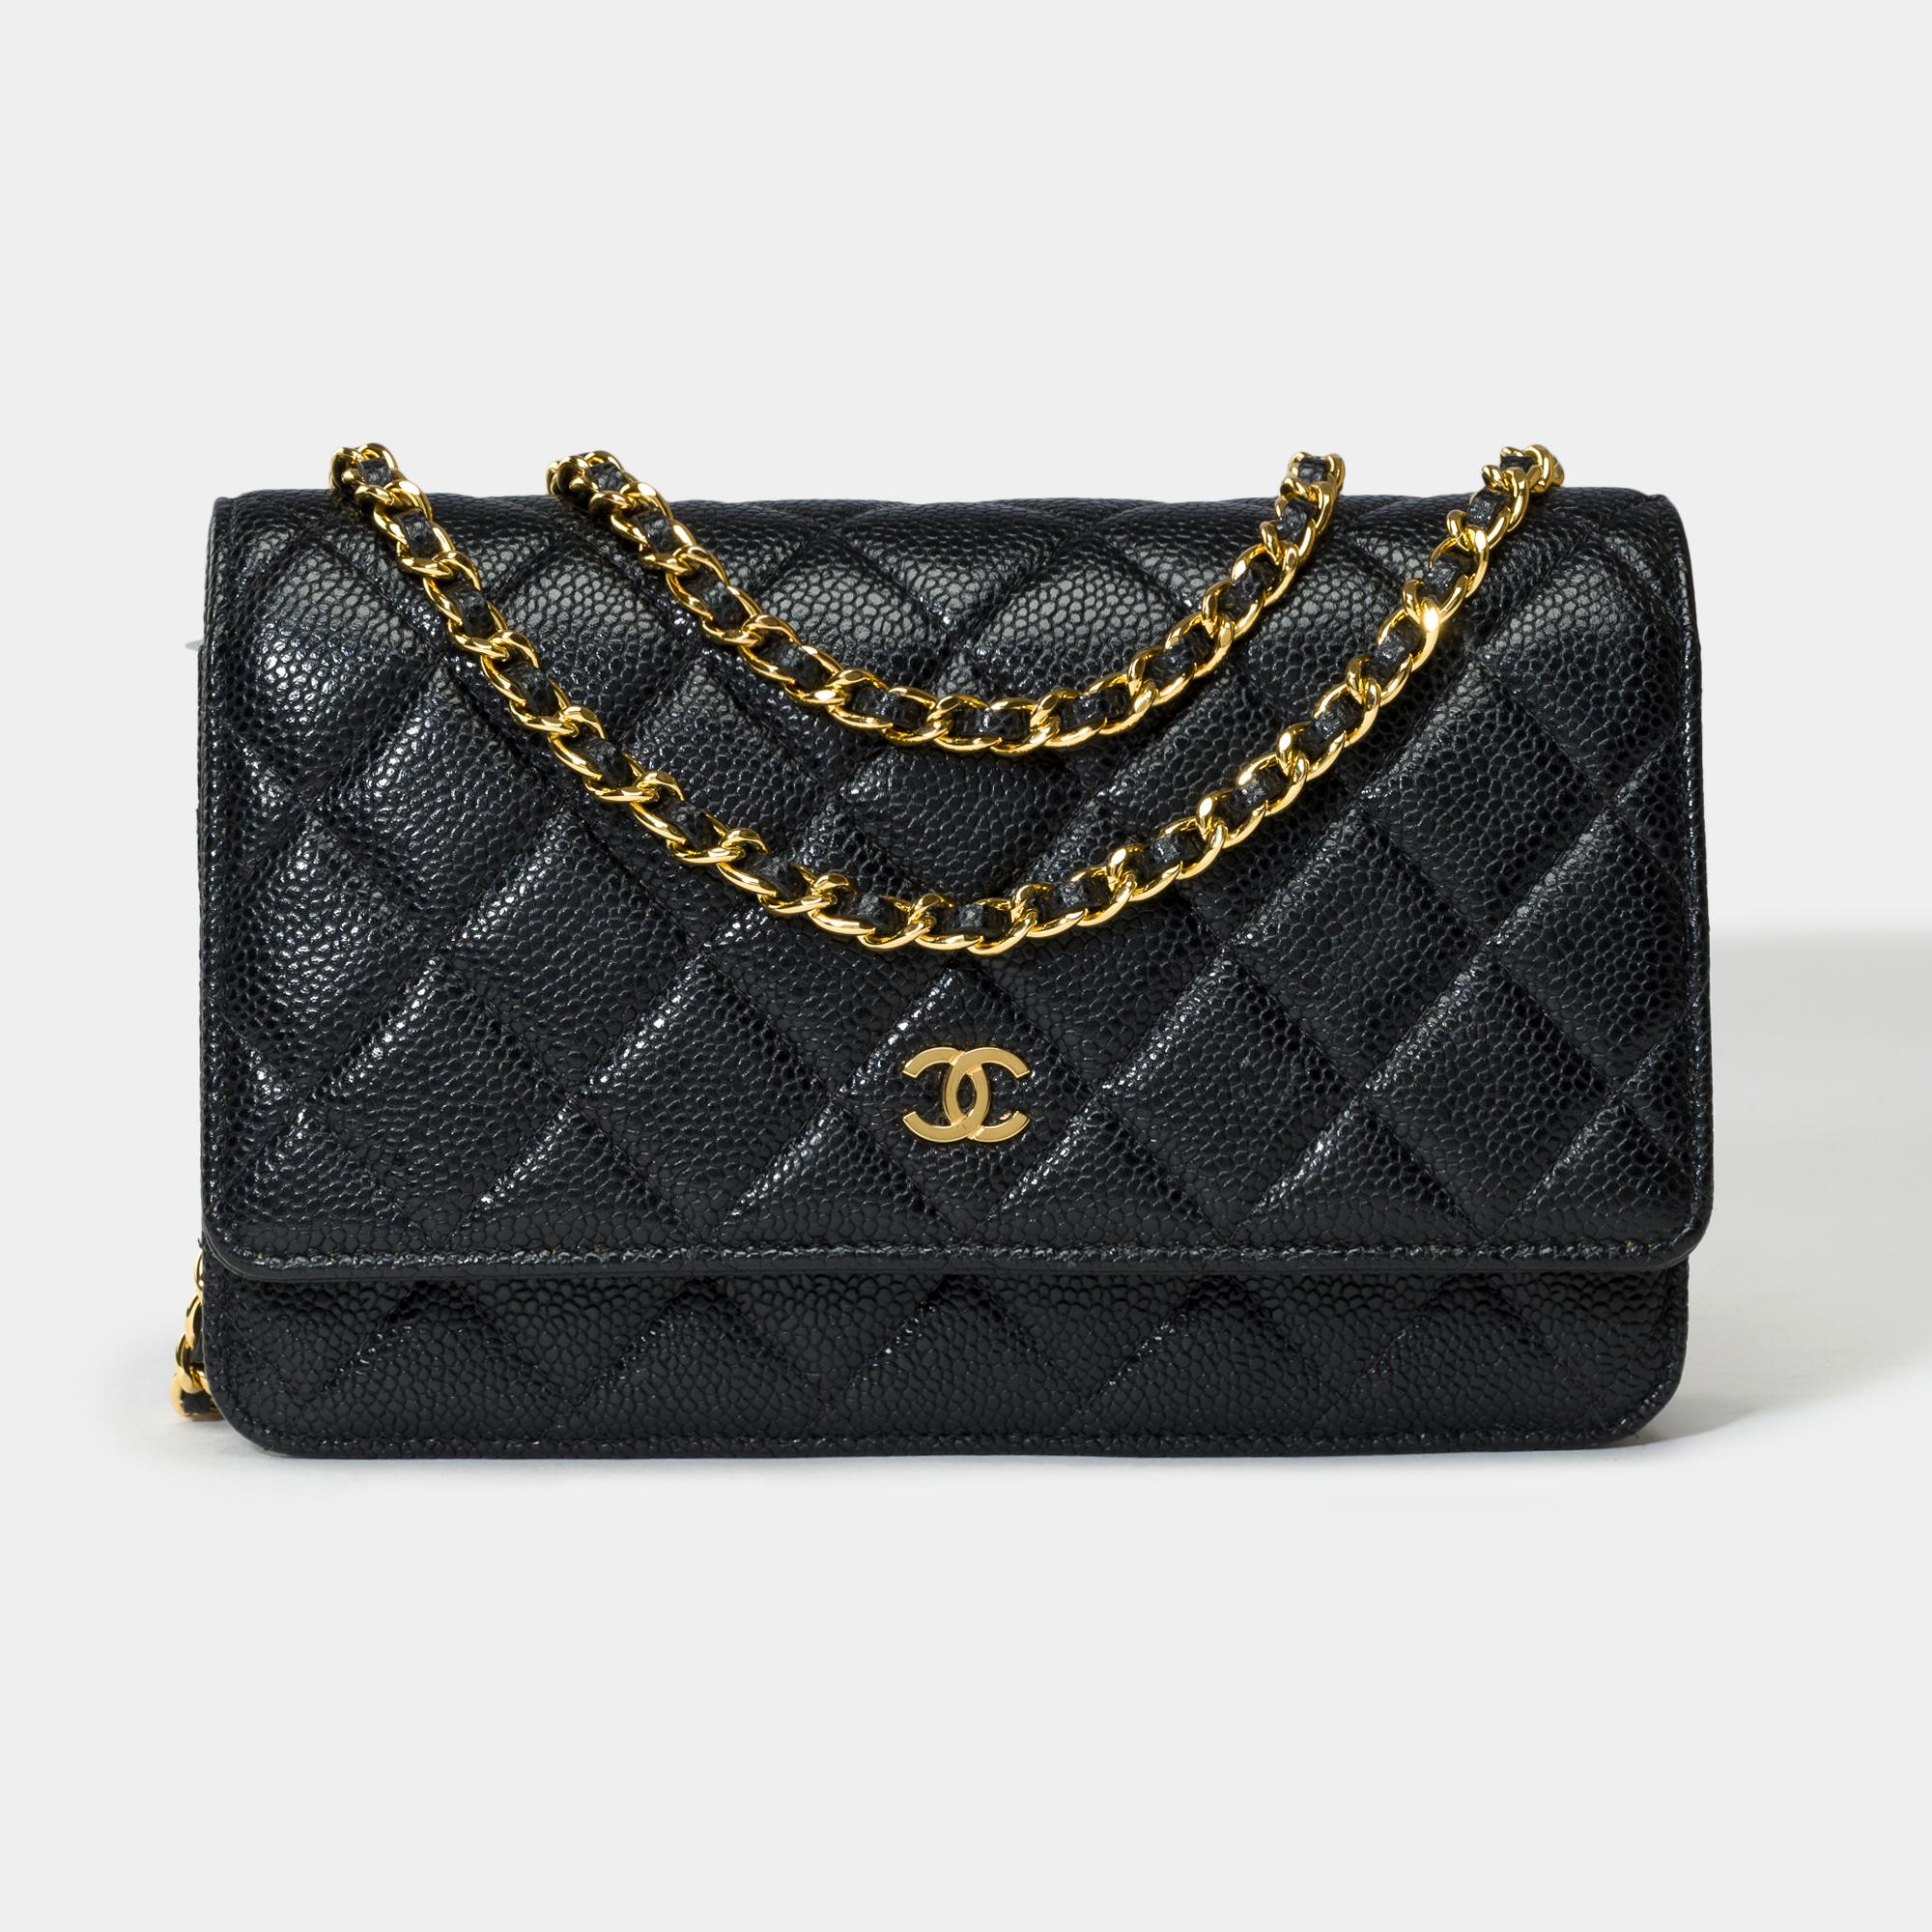 Lovely​​ ​​Chanel​​ ​​Wallet​​ ​​On​​ ​​Chain(WOC)​​ ​​shoulder​​ ​​bag​​ ​​​​ ​​in​​ ​​black​​ ​​quilted​​ ​​caviar​​ ​​leather,​​ ​​gold​​ ​​metal​​ ​​trim,​​ ​​a​​ ​​gold​​ ​​metal​​ ​​chain​​ ​​handle​​ ​​interlaced​​ ​​with​​ ​​black​​